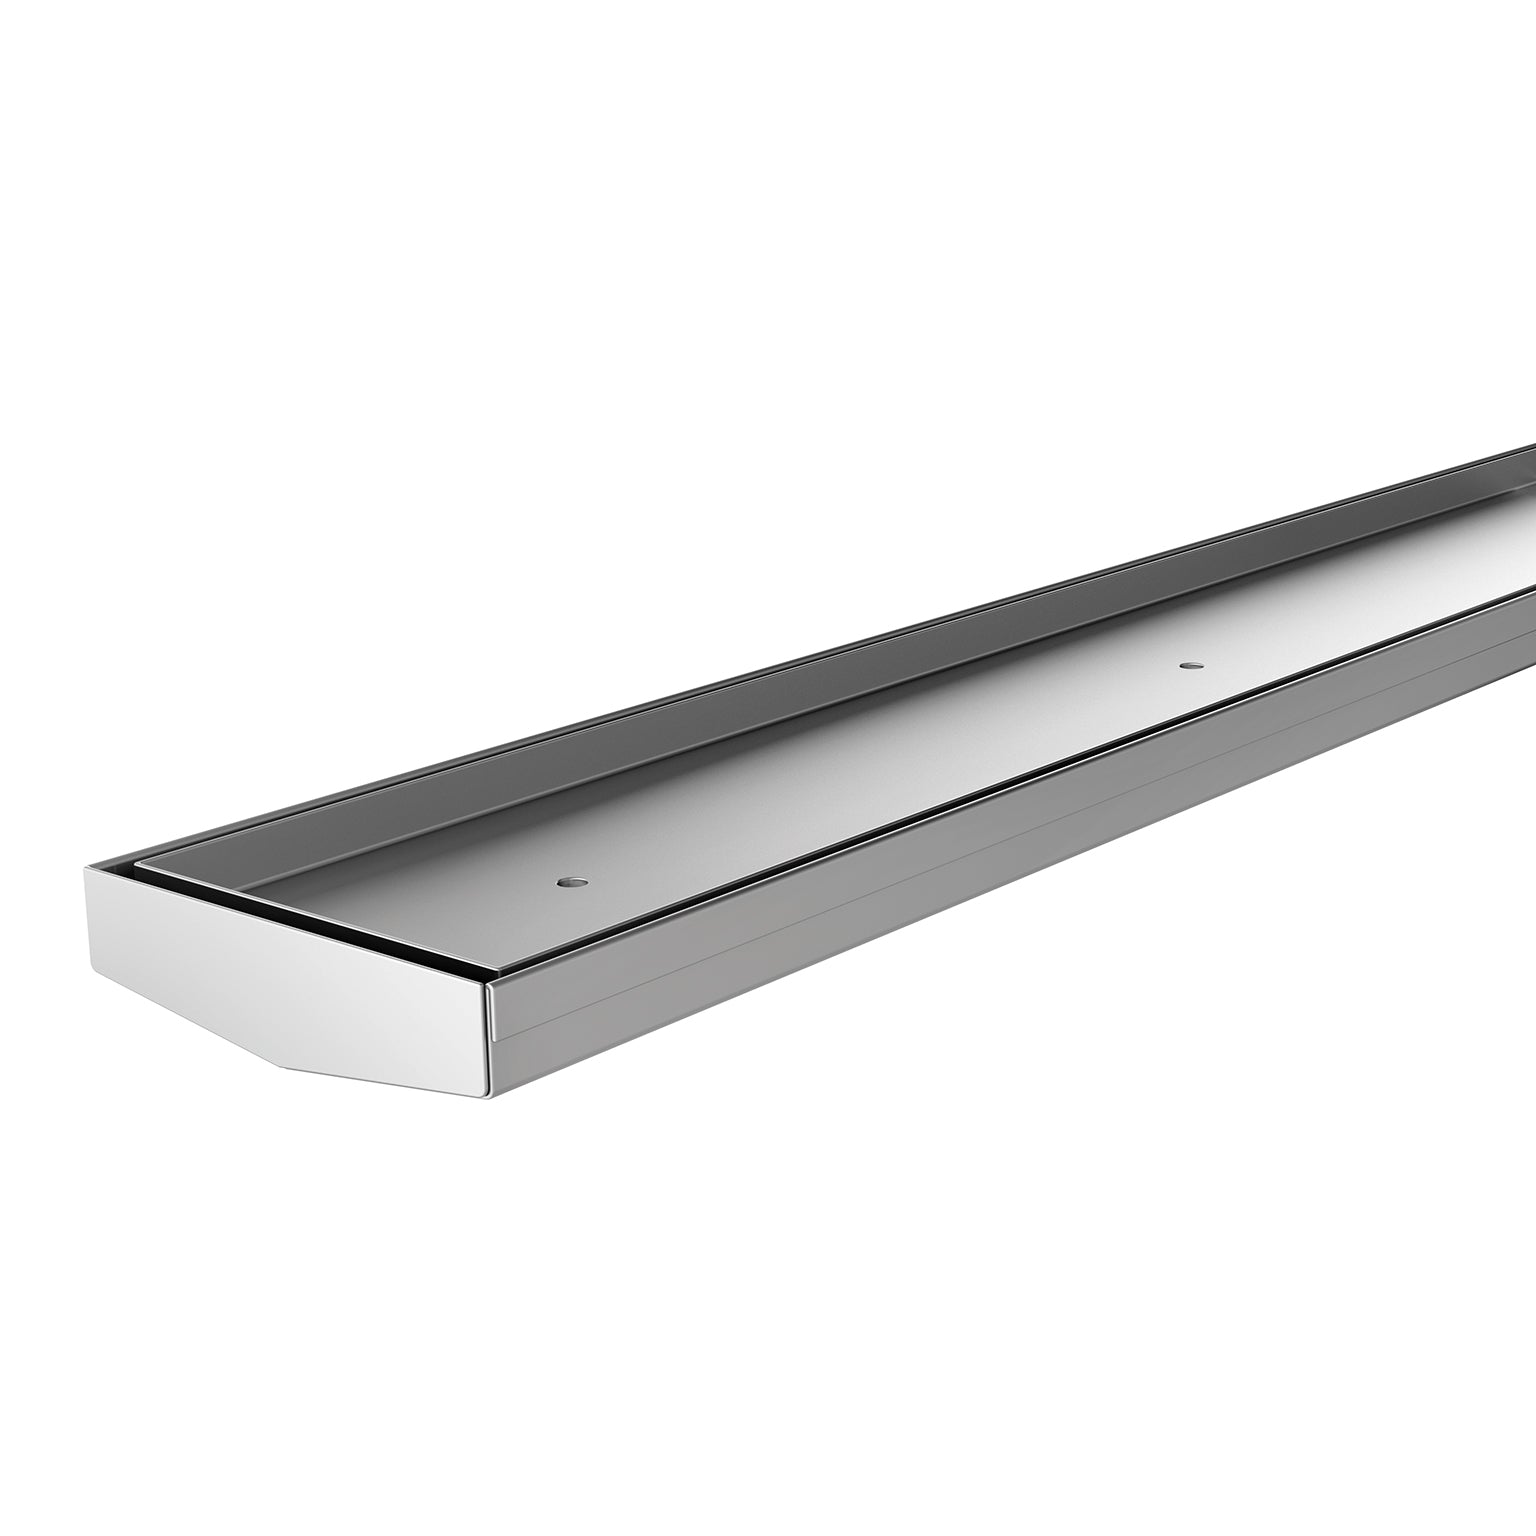 PHOENIX V STAINLESS STEEL 90MM CHANNEL DRAIN TI 100MM OUTLET 600MM, 750MM, 900MM AND 1200MM